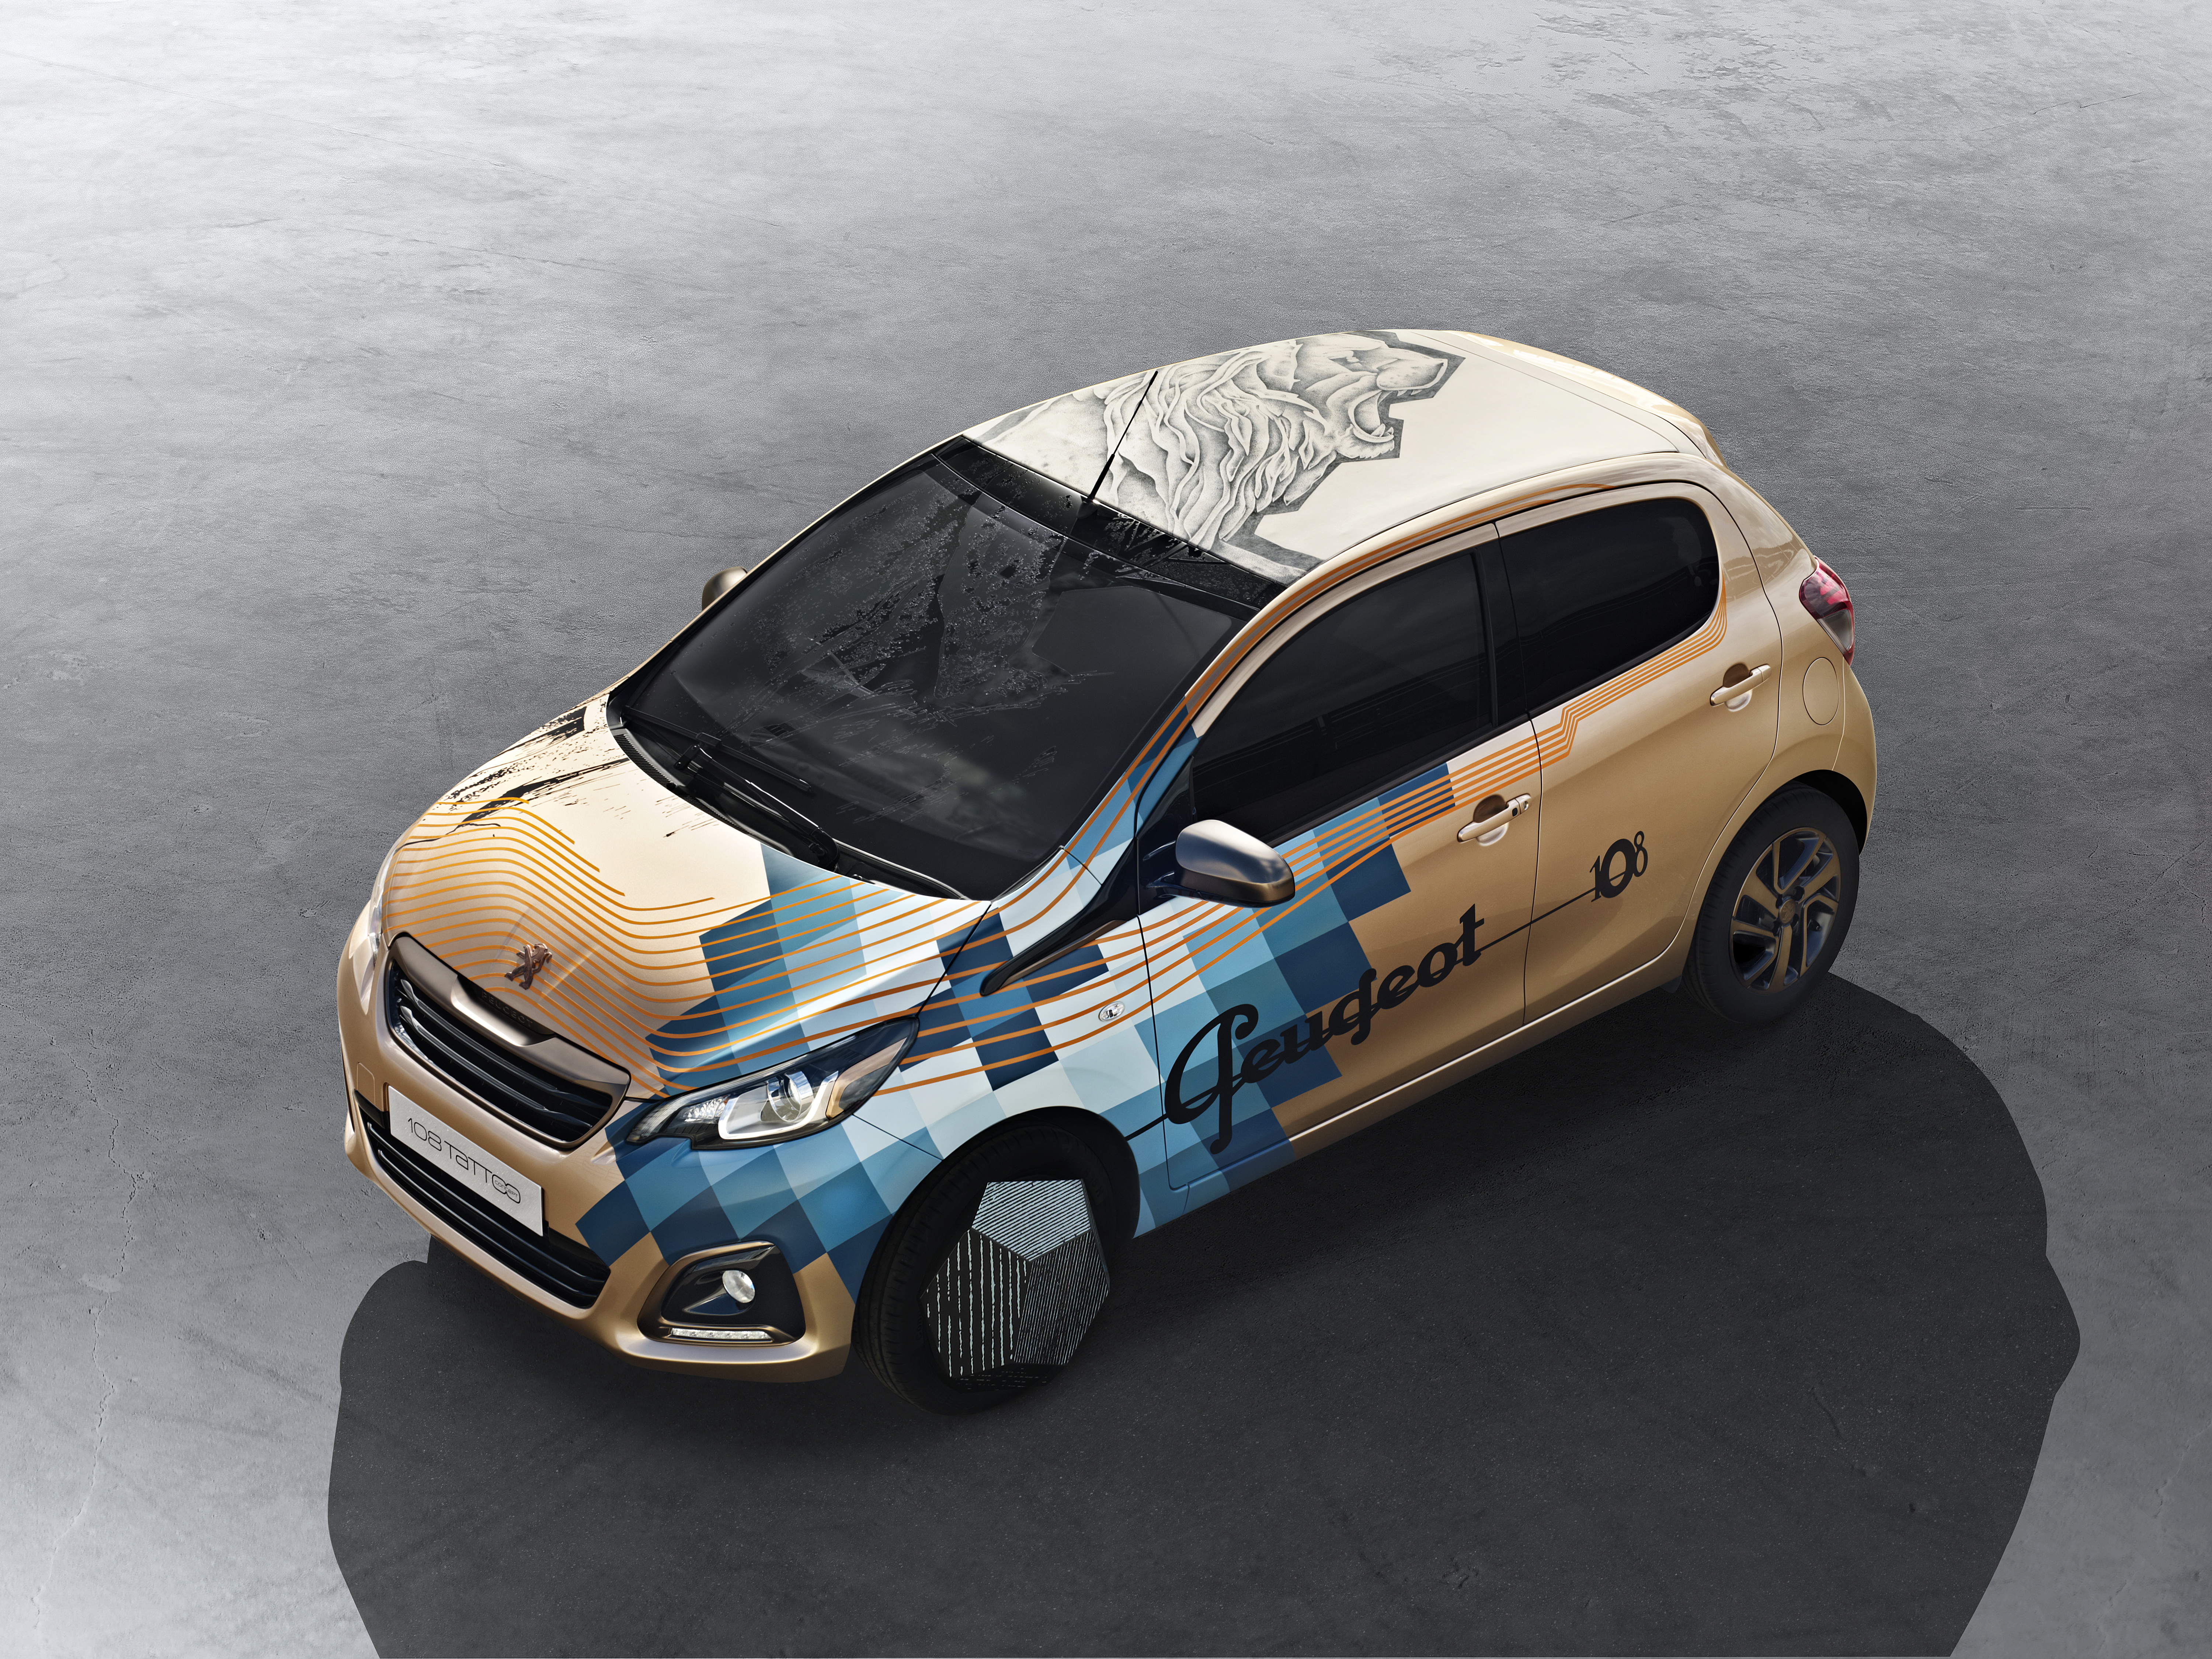 6000x4500 Peugeot Tuning 2014 108 Tattoo voiture, automobile Voitures